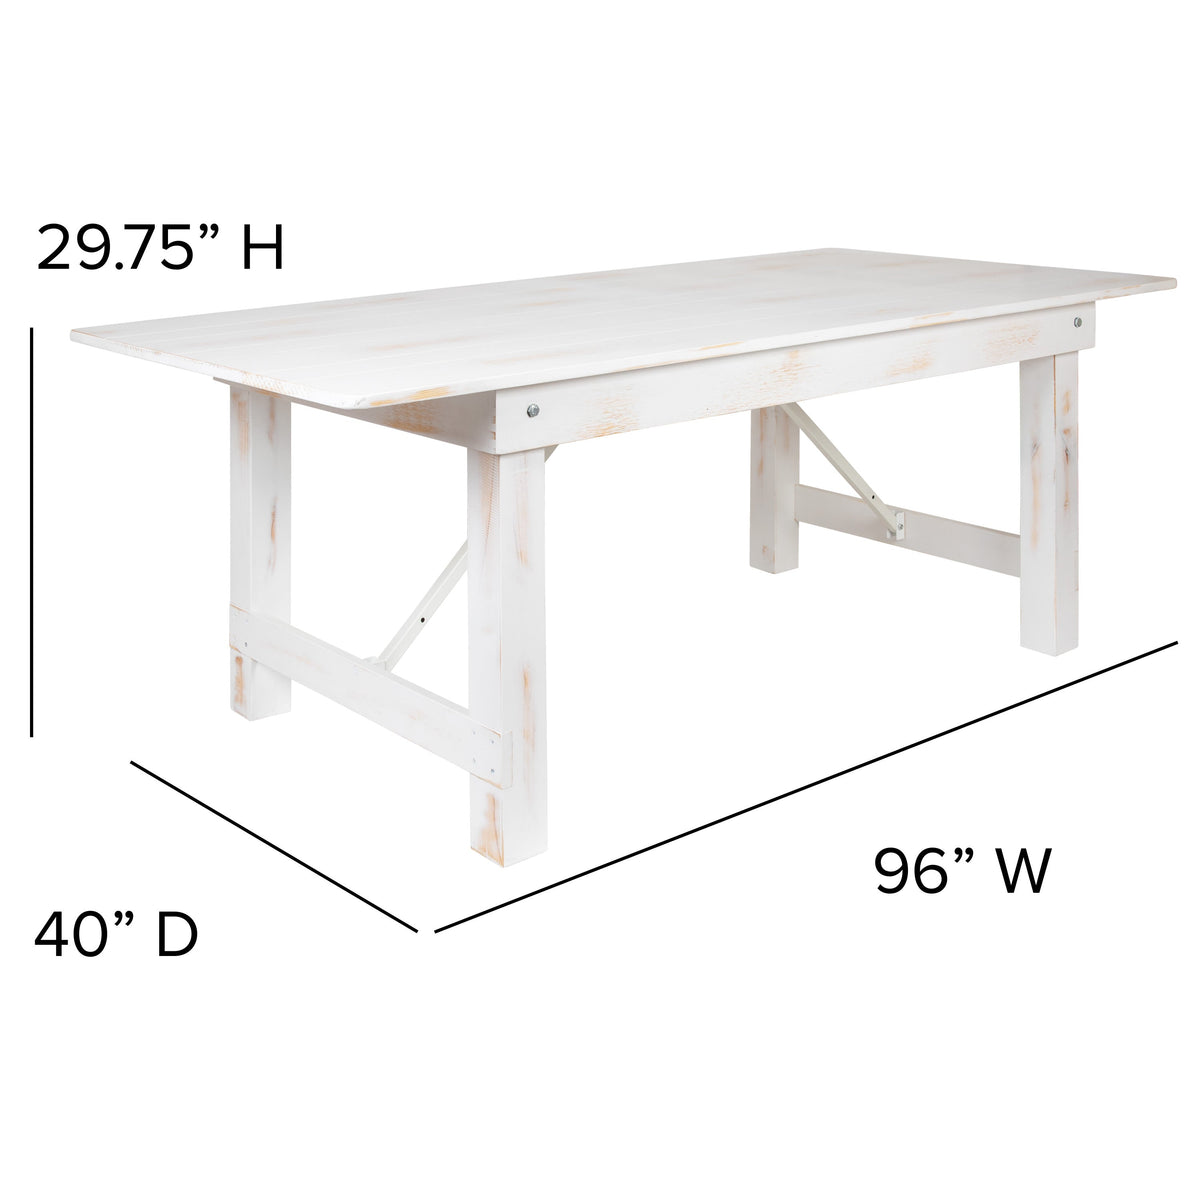 Antique Rustic White |#| 3 Piece Set-8' x 40inch Antique Rustic White Folding Farm Table and Two Bench Set